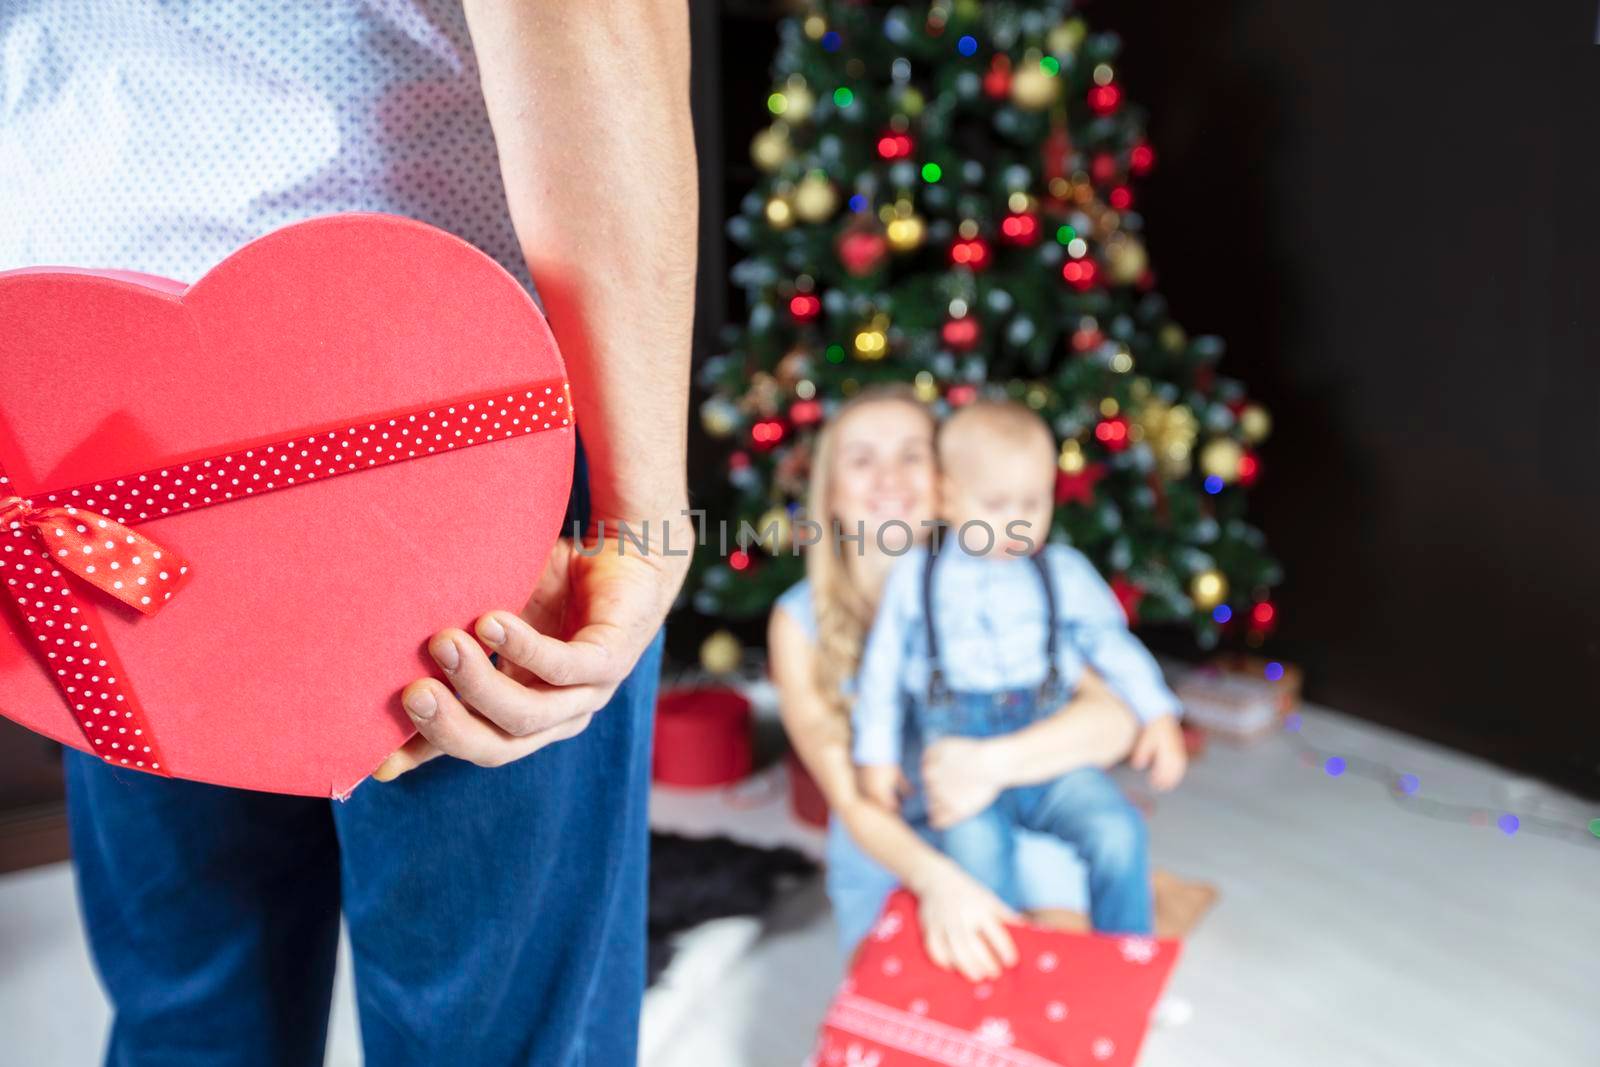 Hands holding a red gift box on a background of the Christmas tree. Christmas present to the family.